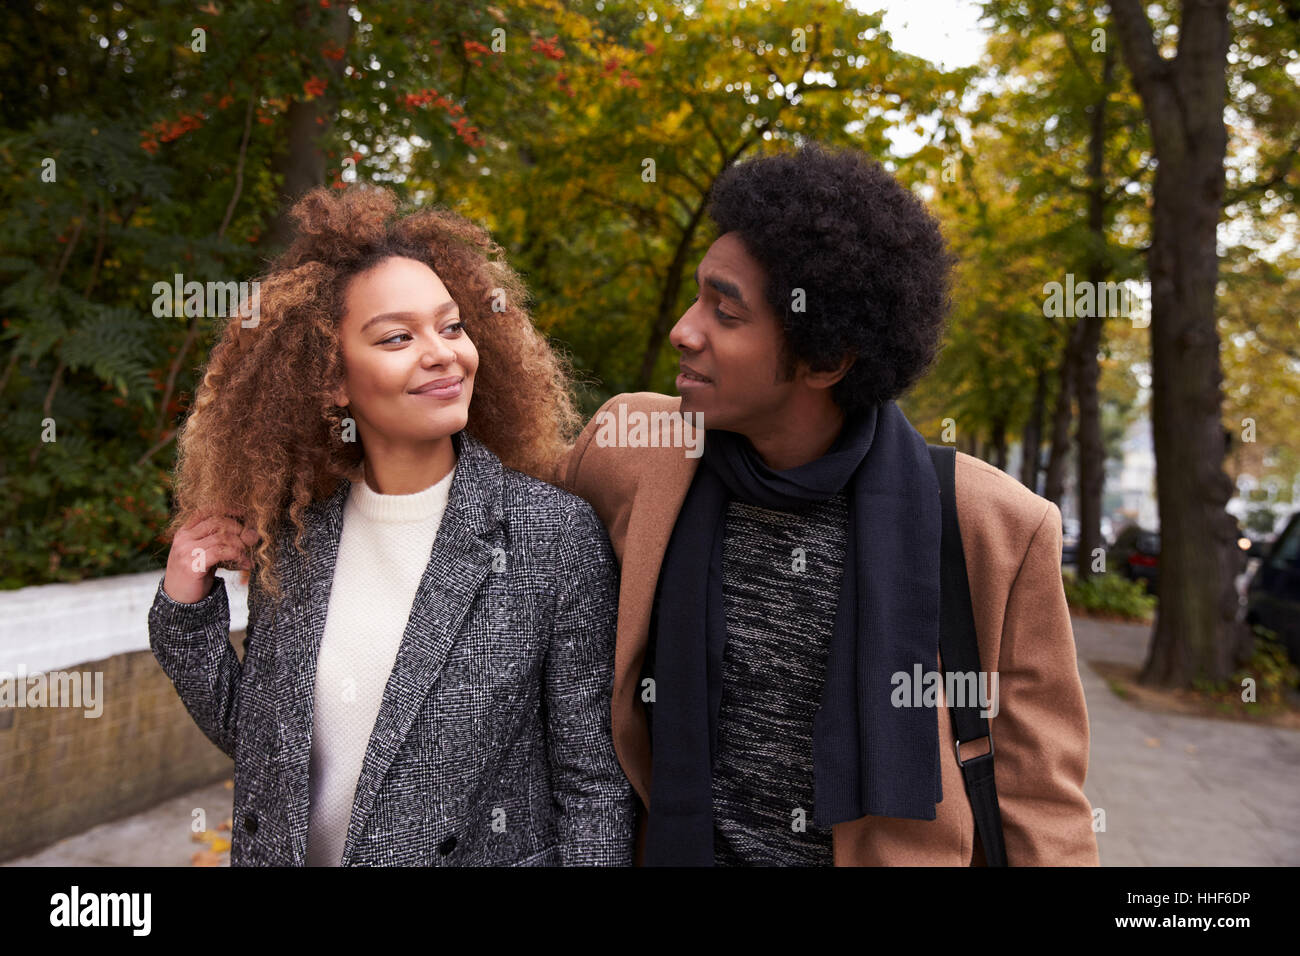 Romantic Young Couple Walking On Fall Street In City Stock Photo